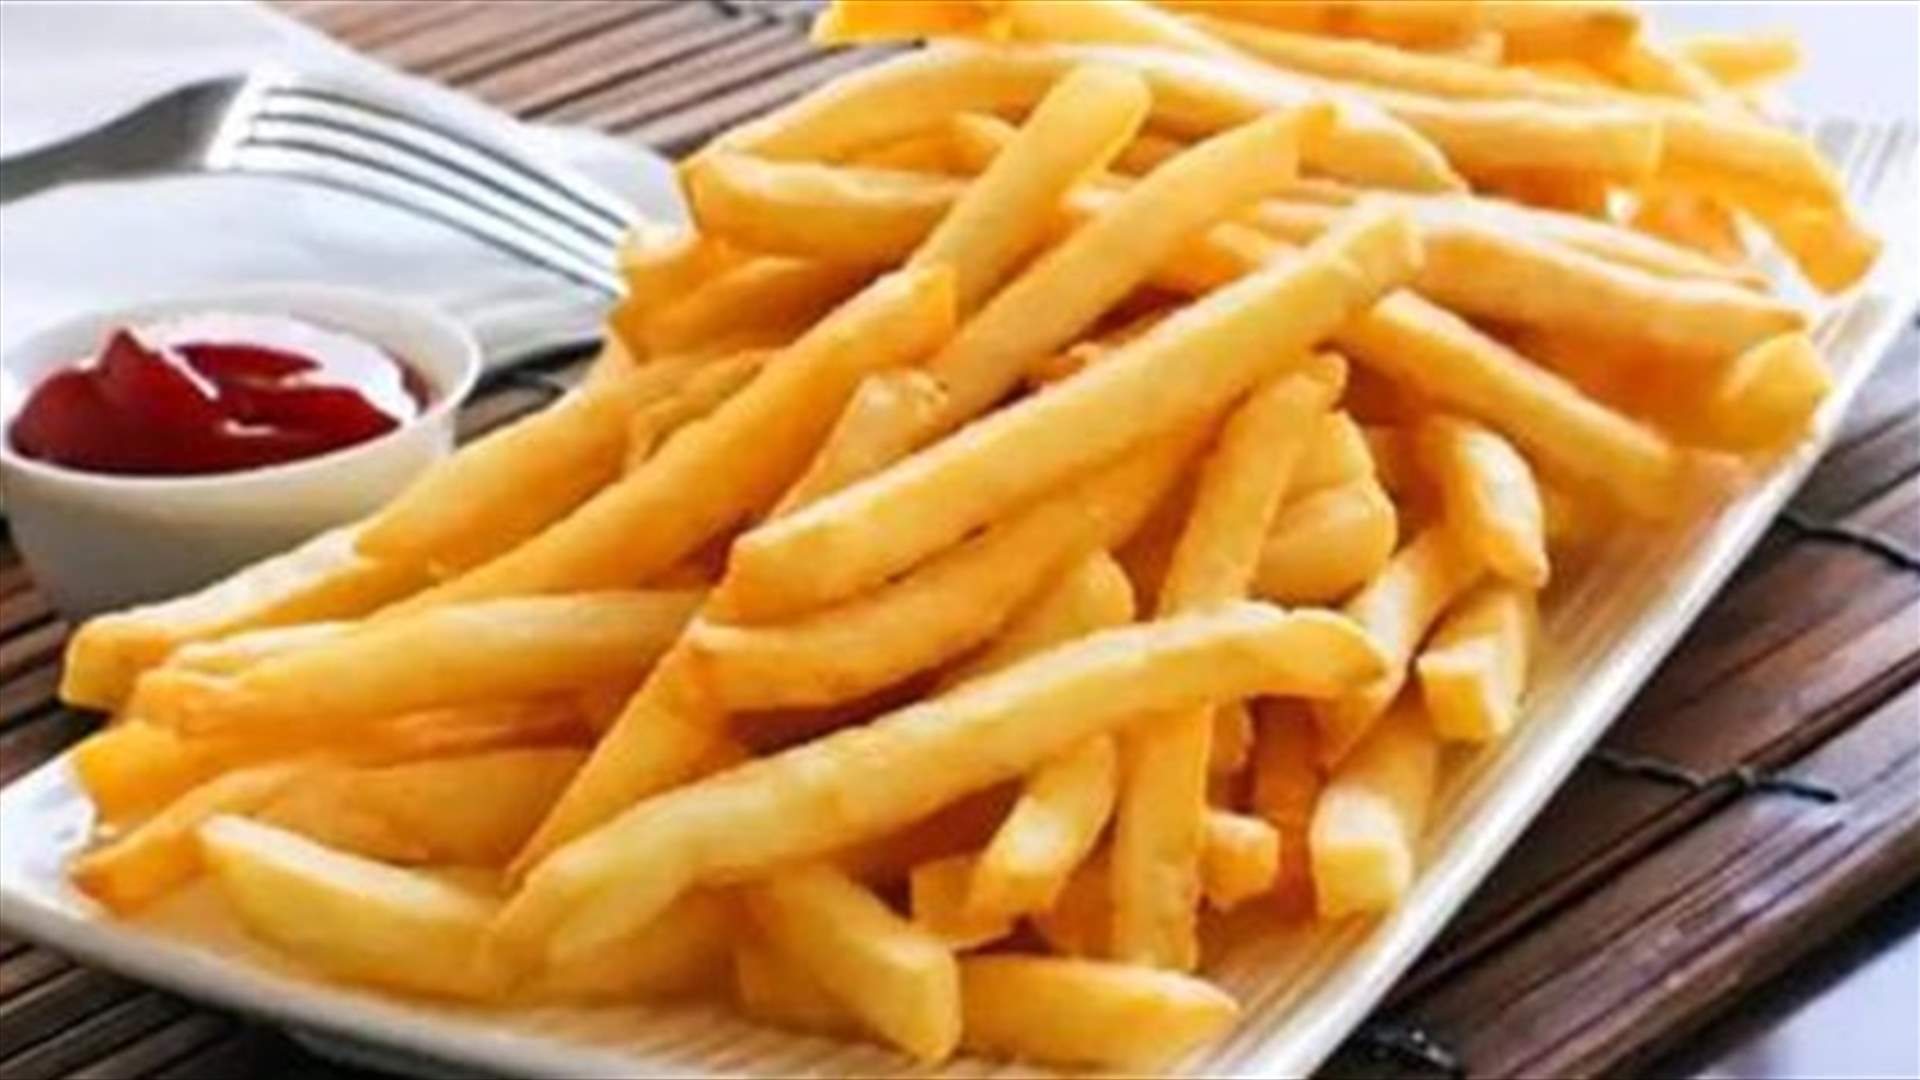 Woman Arrested For Stealing Three French Fries